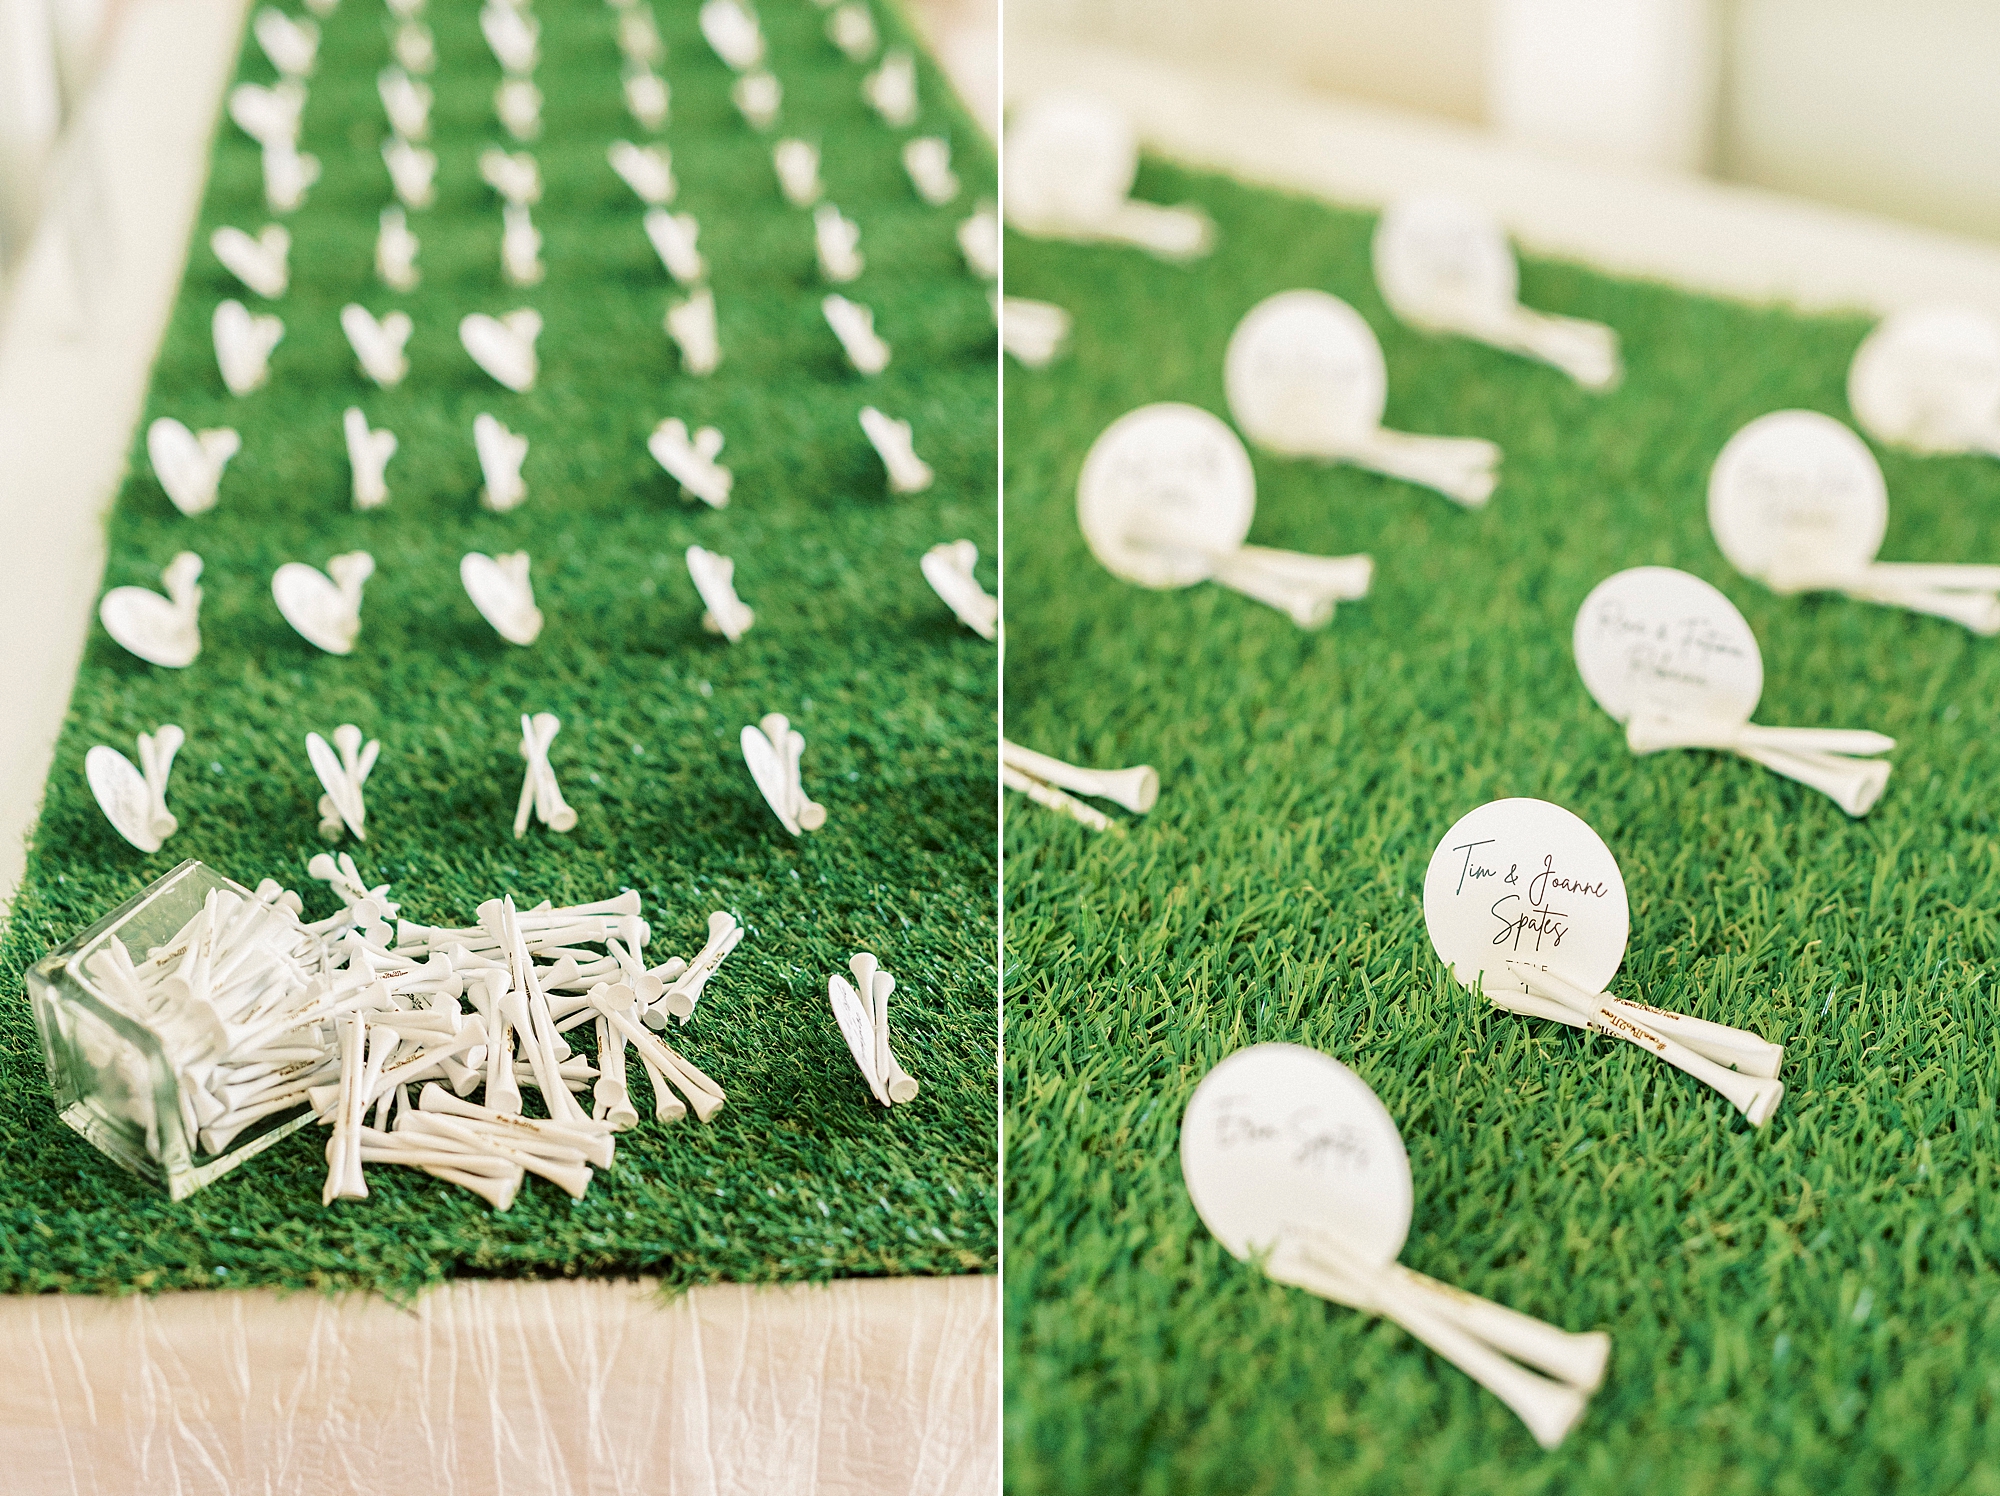 golf inspired seating cards for summer wedding at Separk Mansion